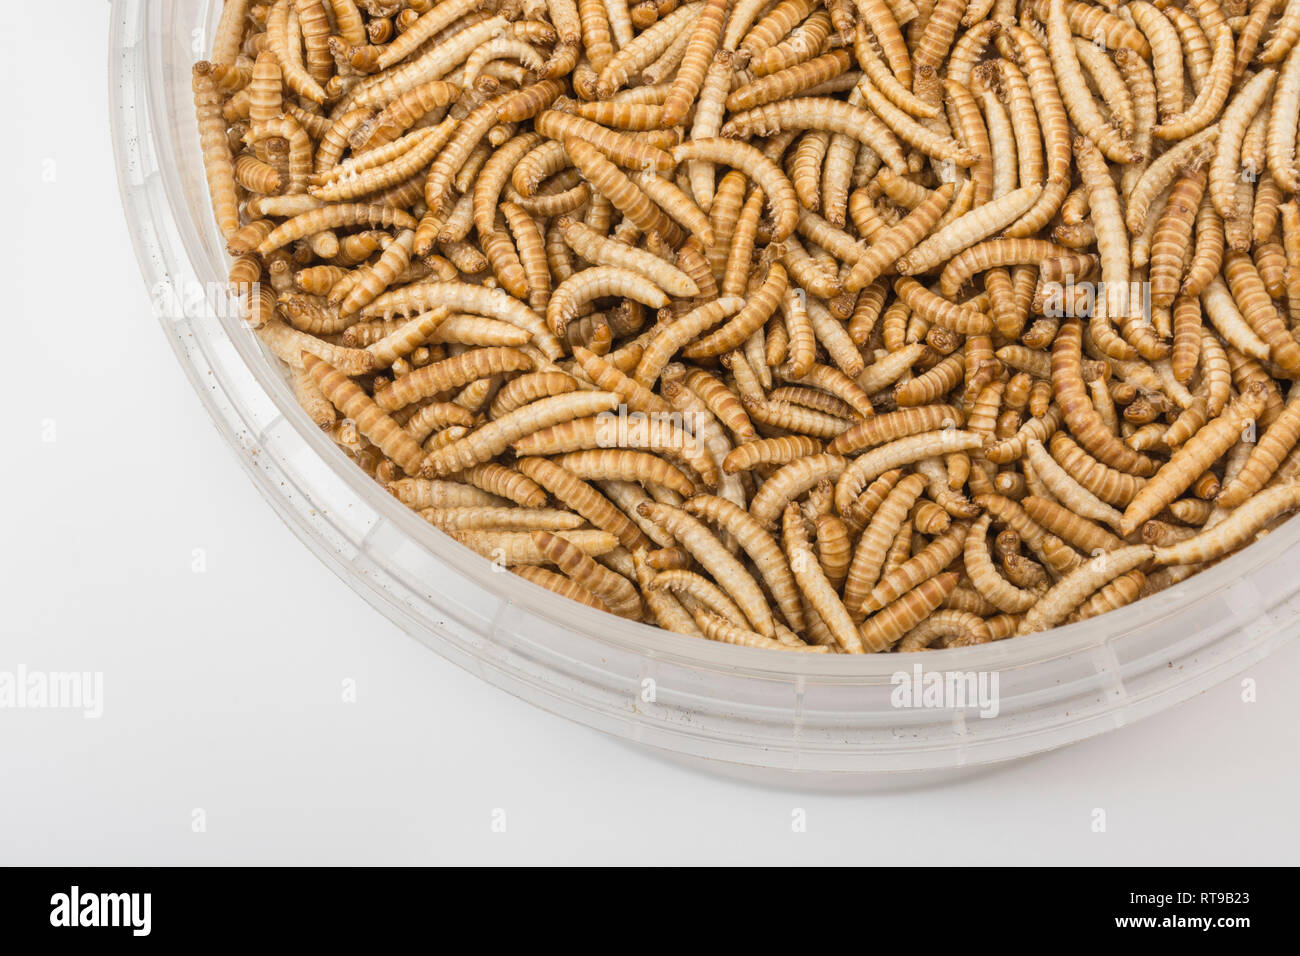 Freeze-dried edible Buffalo worms, Alphitobius diaperinus. Metaphor eating bugs, eating insects, Entomophagy, edible bugs, edible insects bizarre food Stock Photo